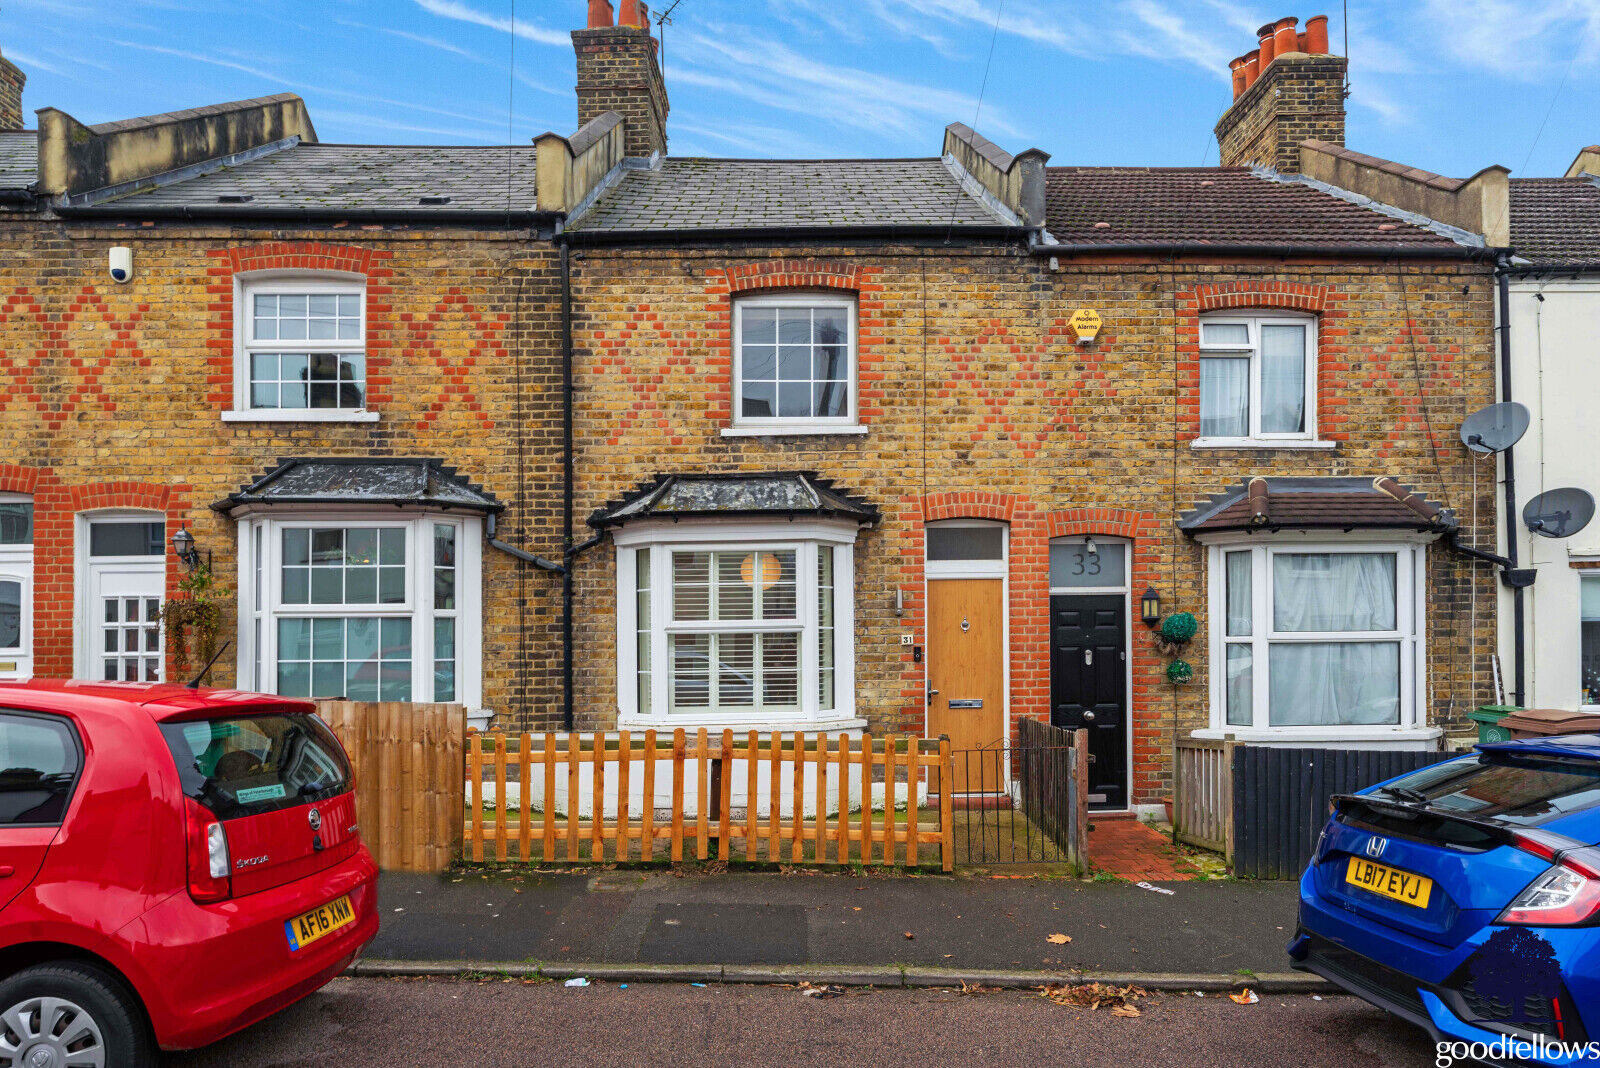 2 bedroom mid terraced house to rent, Available now Warwick Road, Sutton, SM1, main image